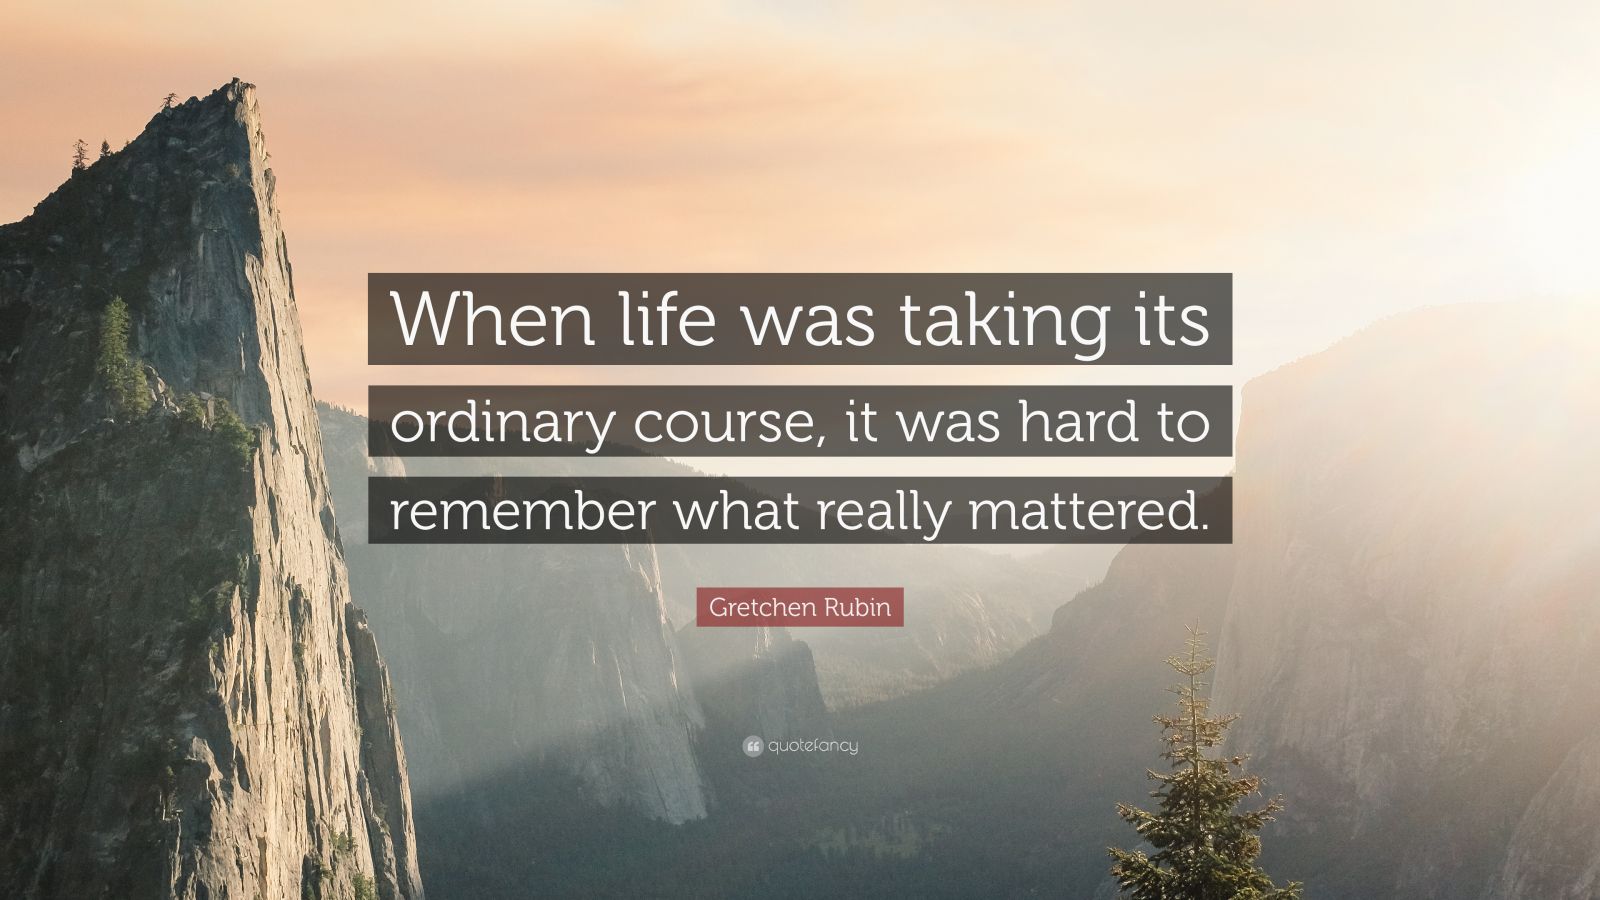 Gretchen Rubin Quote When Life Was Taking Its Ordinary Course It Was